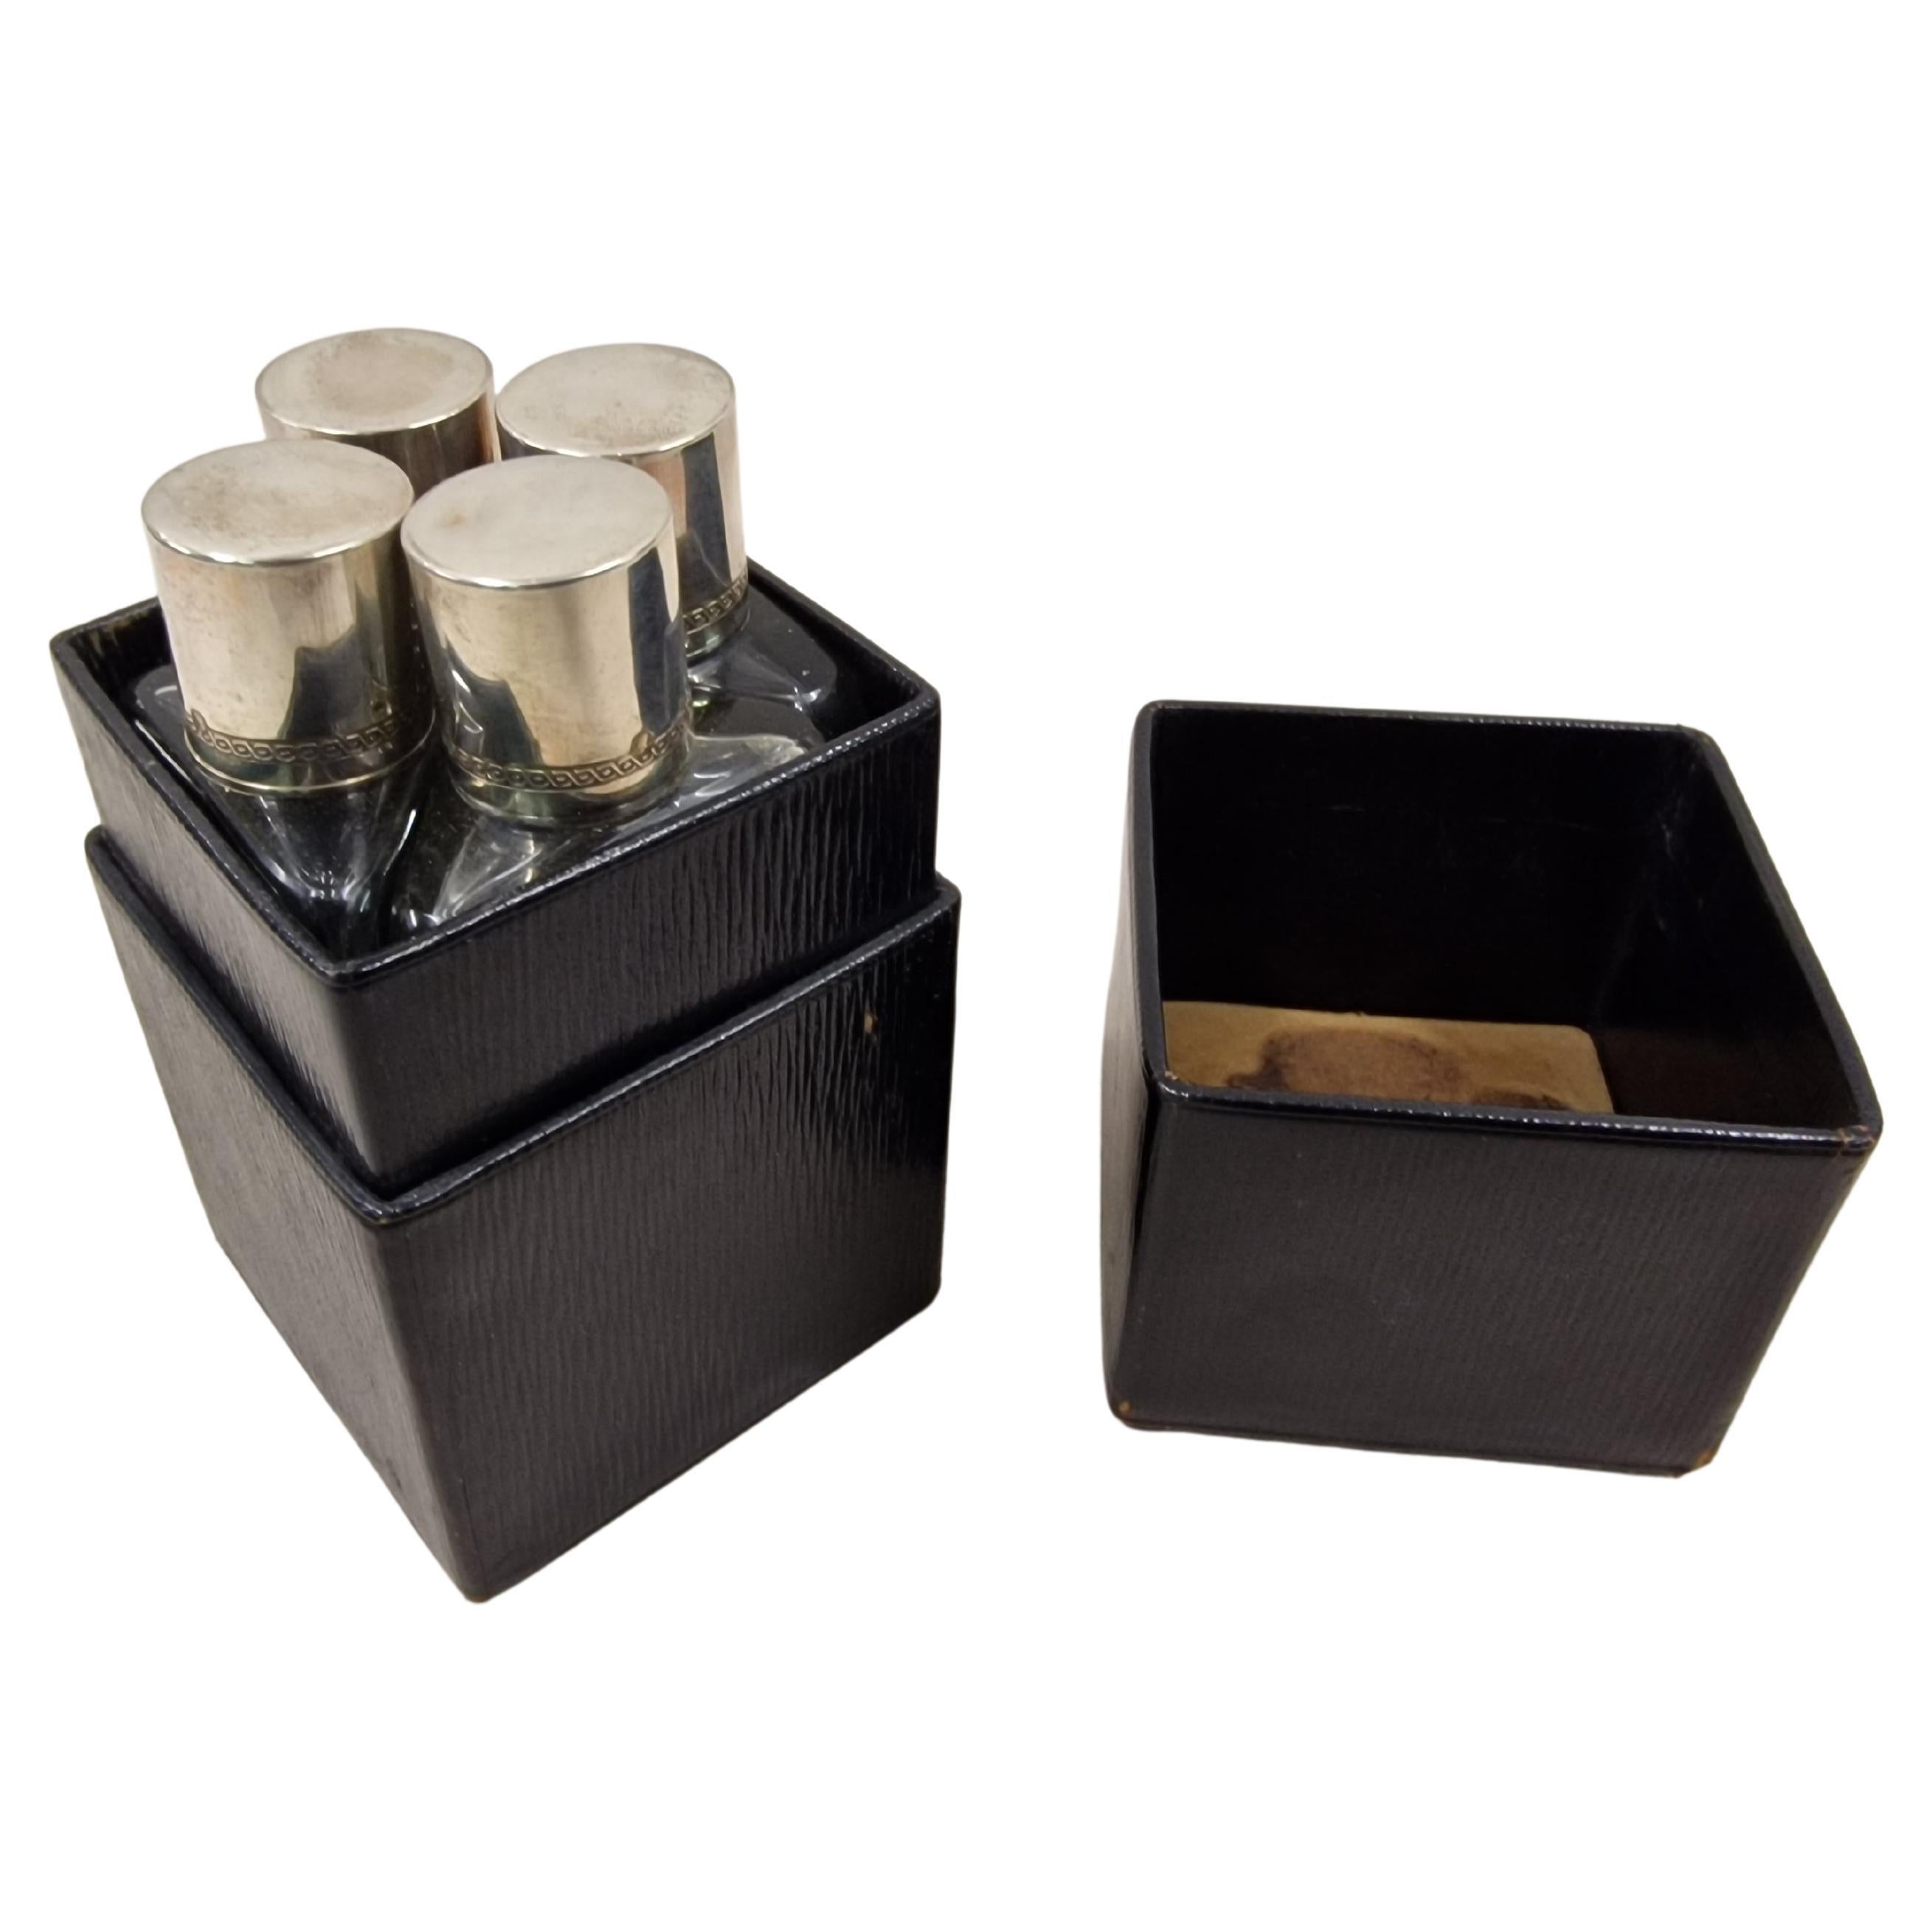 Set of four perfume flacons in the original black leather box, made in the period from 1910 to 1920, in the art nouveau era, most probably made in Austria. 
The lids of the four bottles are out of silver with hallmark and beautifully decorated with